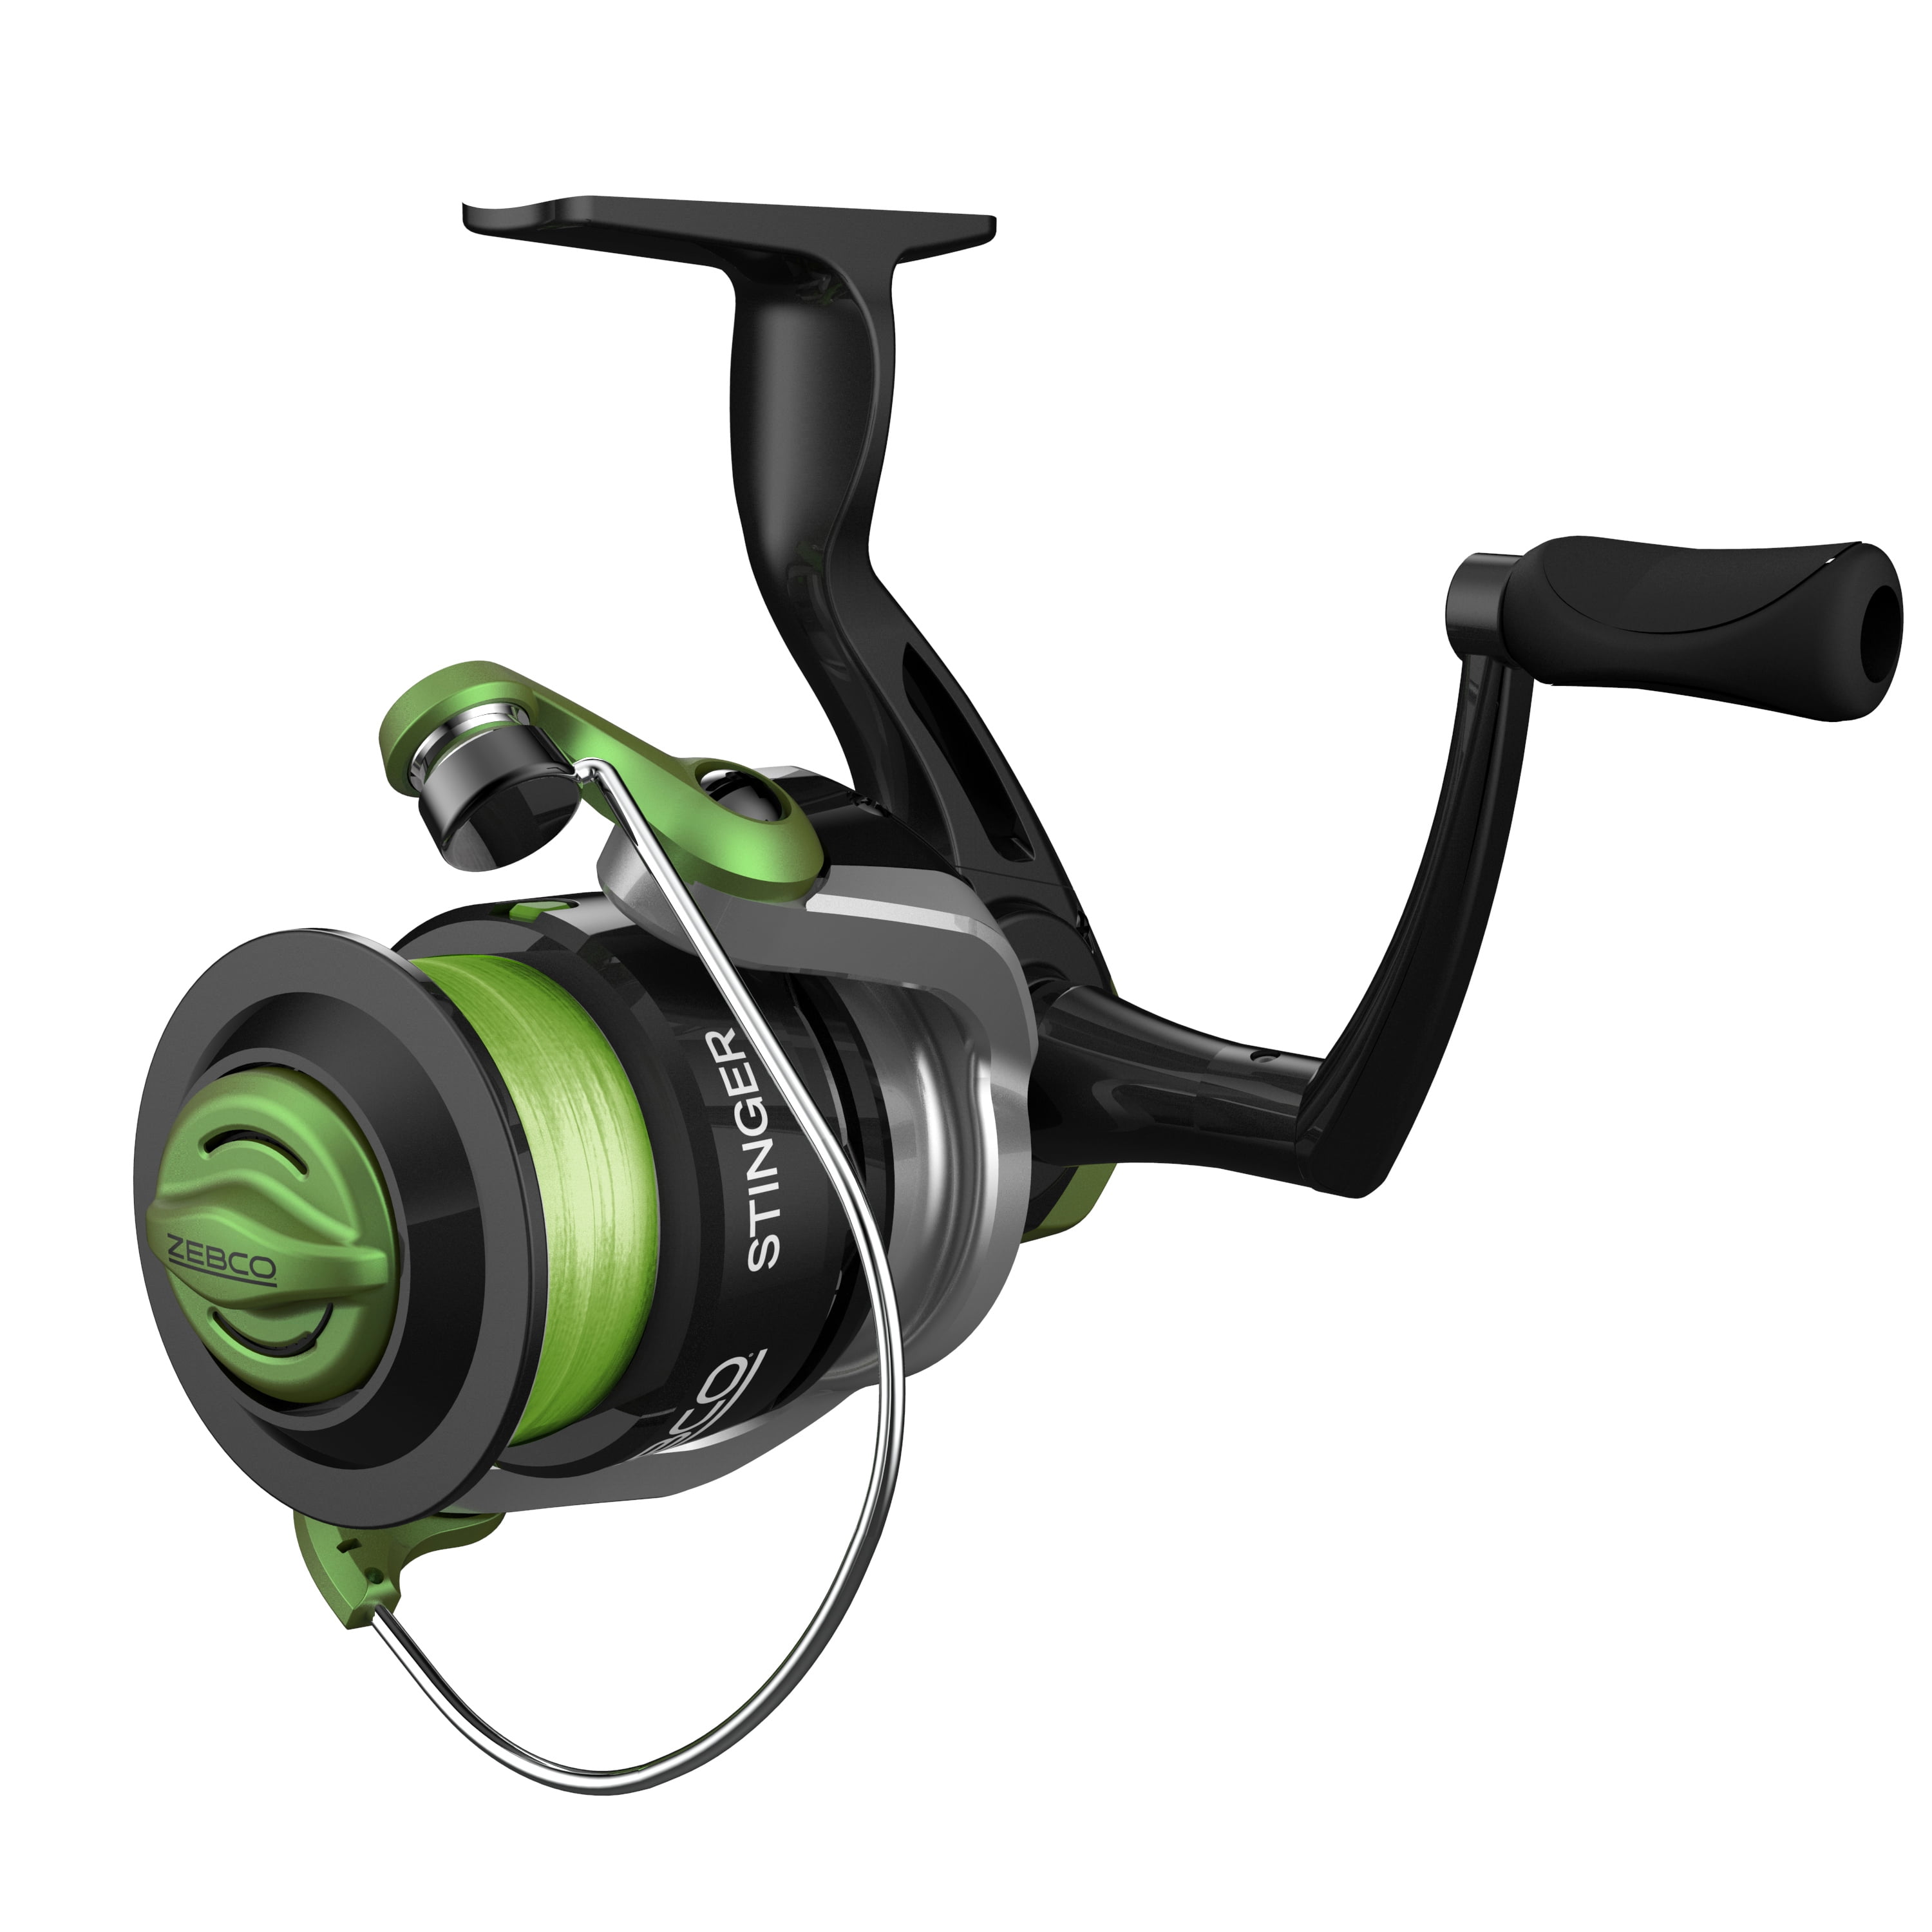 Zebco Stinger Spinning Fishing Reel, Size 30 Changeable Right- or Left-Hand  Retrieve, All-Metal Gears, Ball Bearing System, Pre-Spooled with 10-Pound